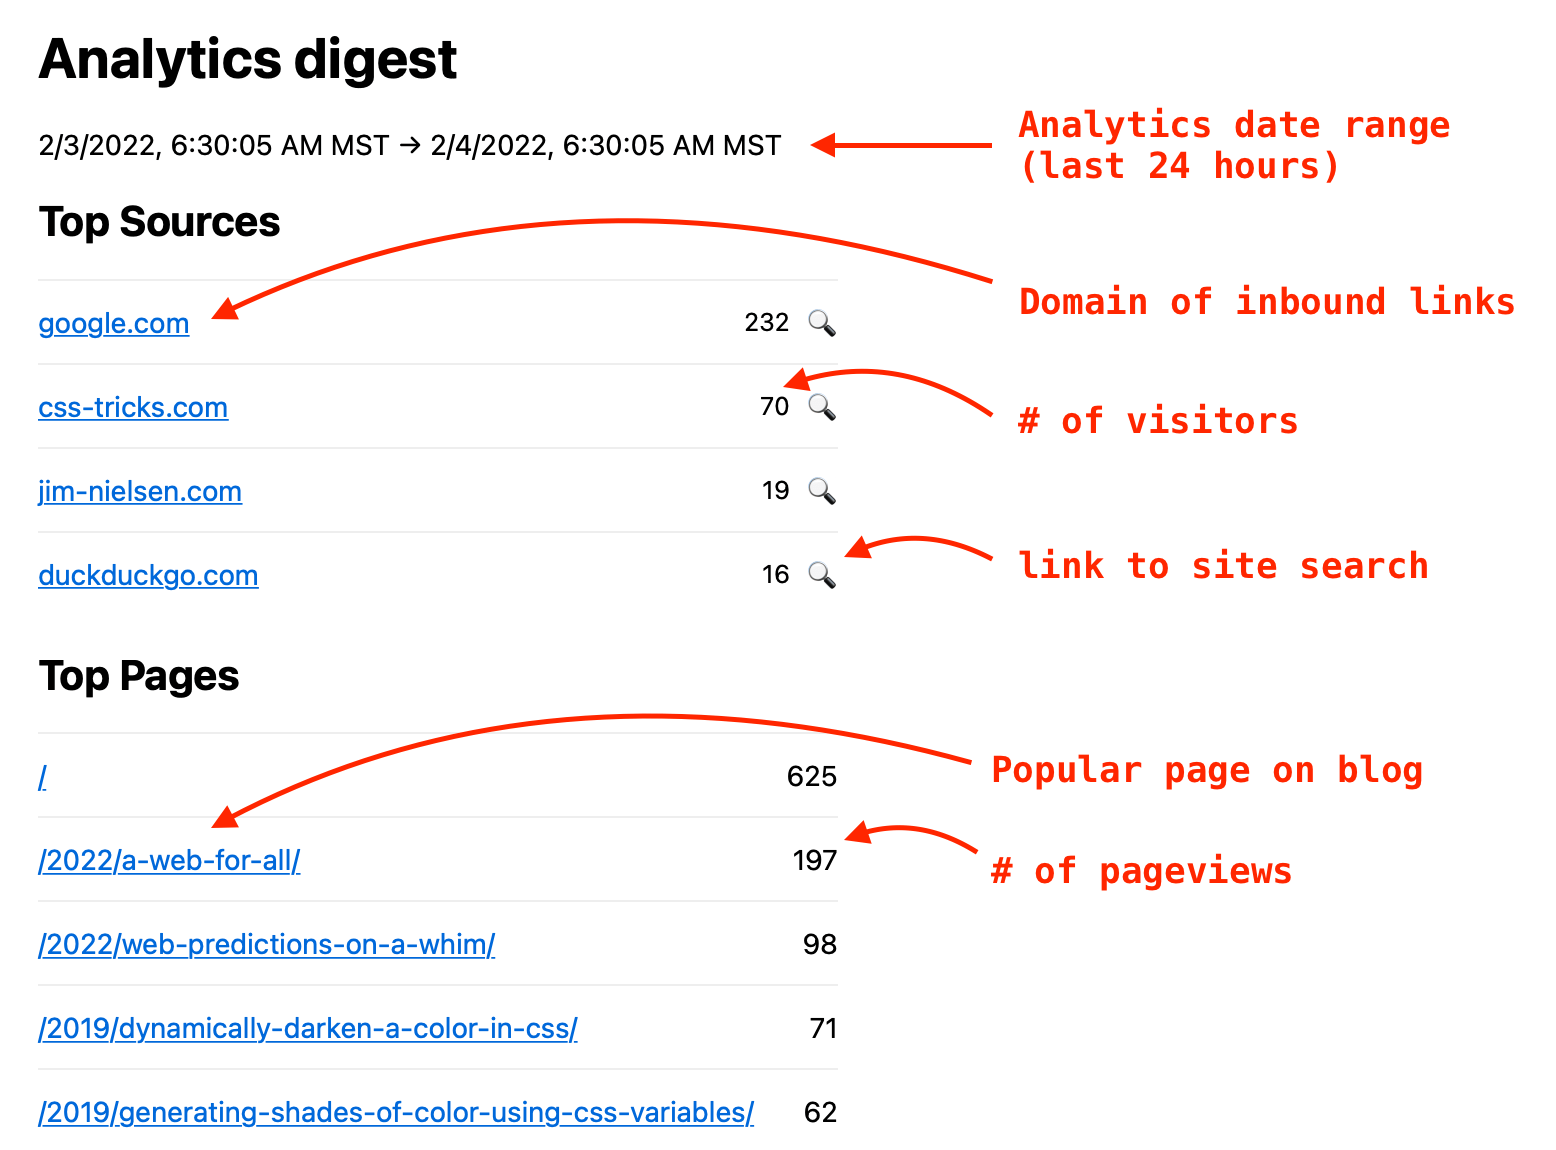 Screenshot of my analytics email digest with a breakdown of each individual piece of the design, like the analytics date range, popular domains of inbound links, the number of pageviews, and a link to Google site search.